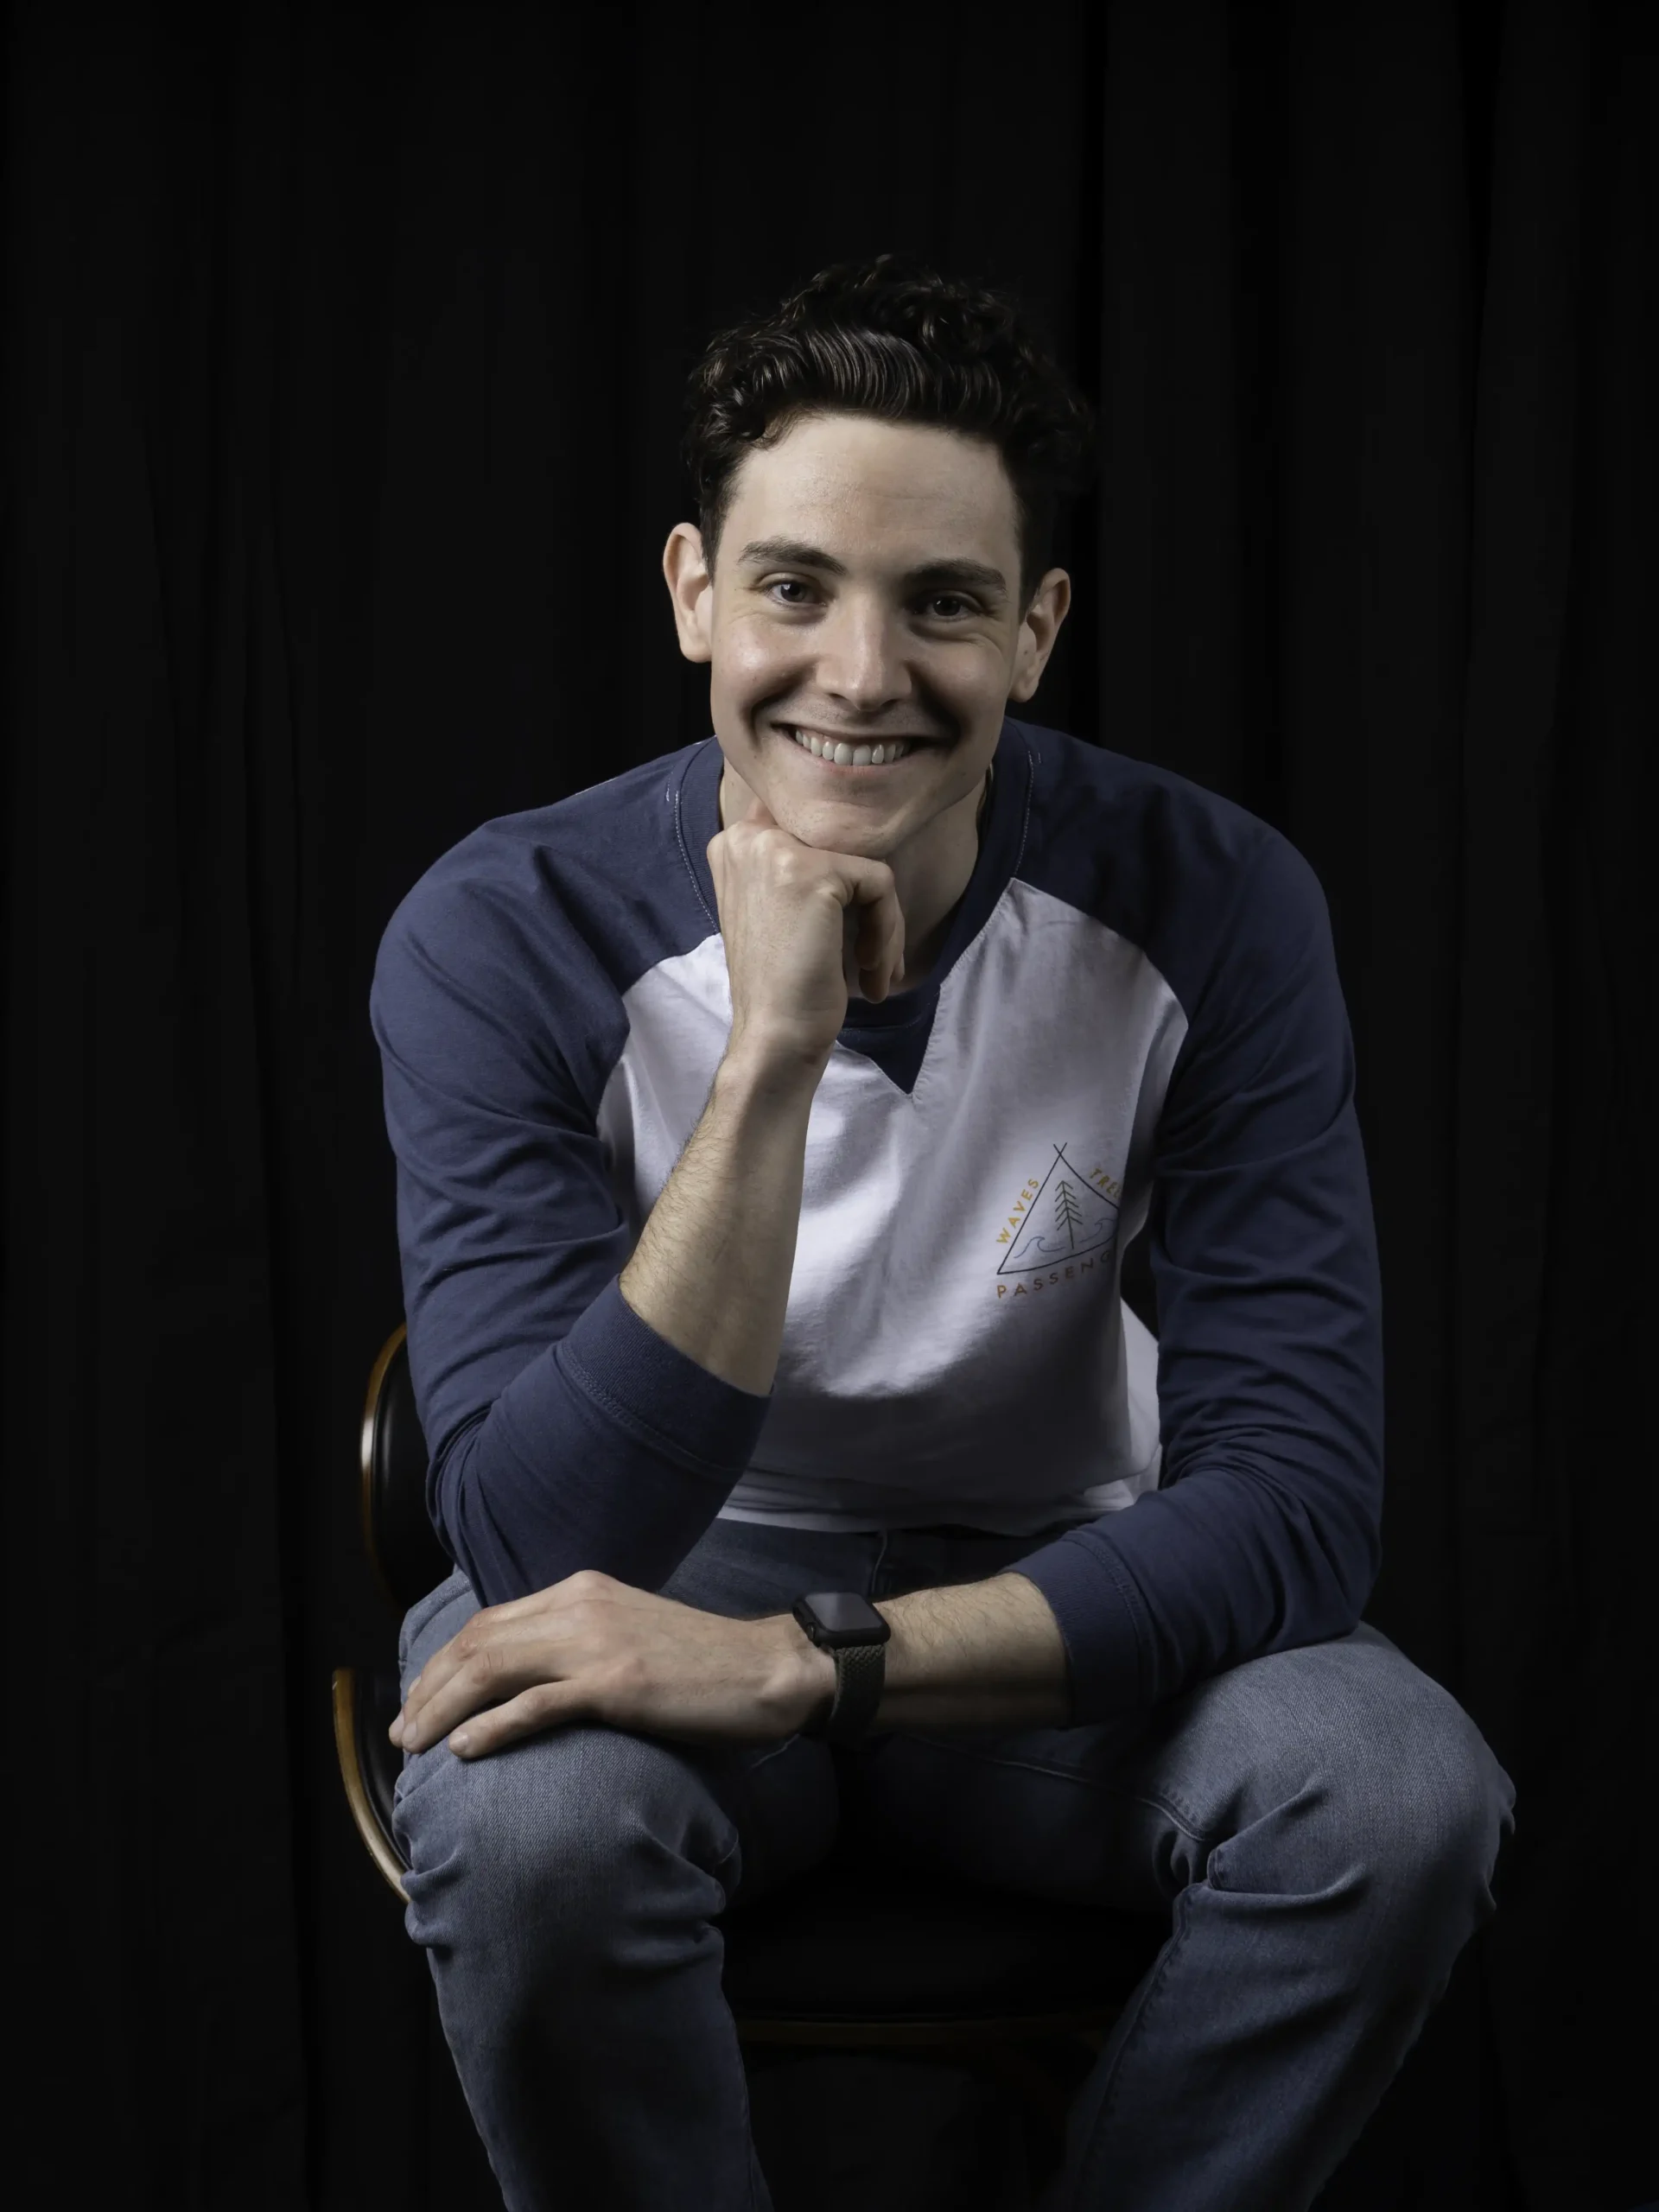 A portrait style photo of a man sitting on a stool. He's one of the video production team and is set against a black background. He's leaning forwards with one hand resting under his chin. he's smiling.